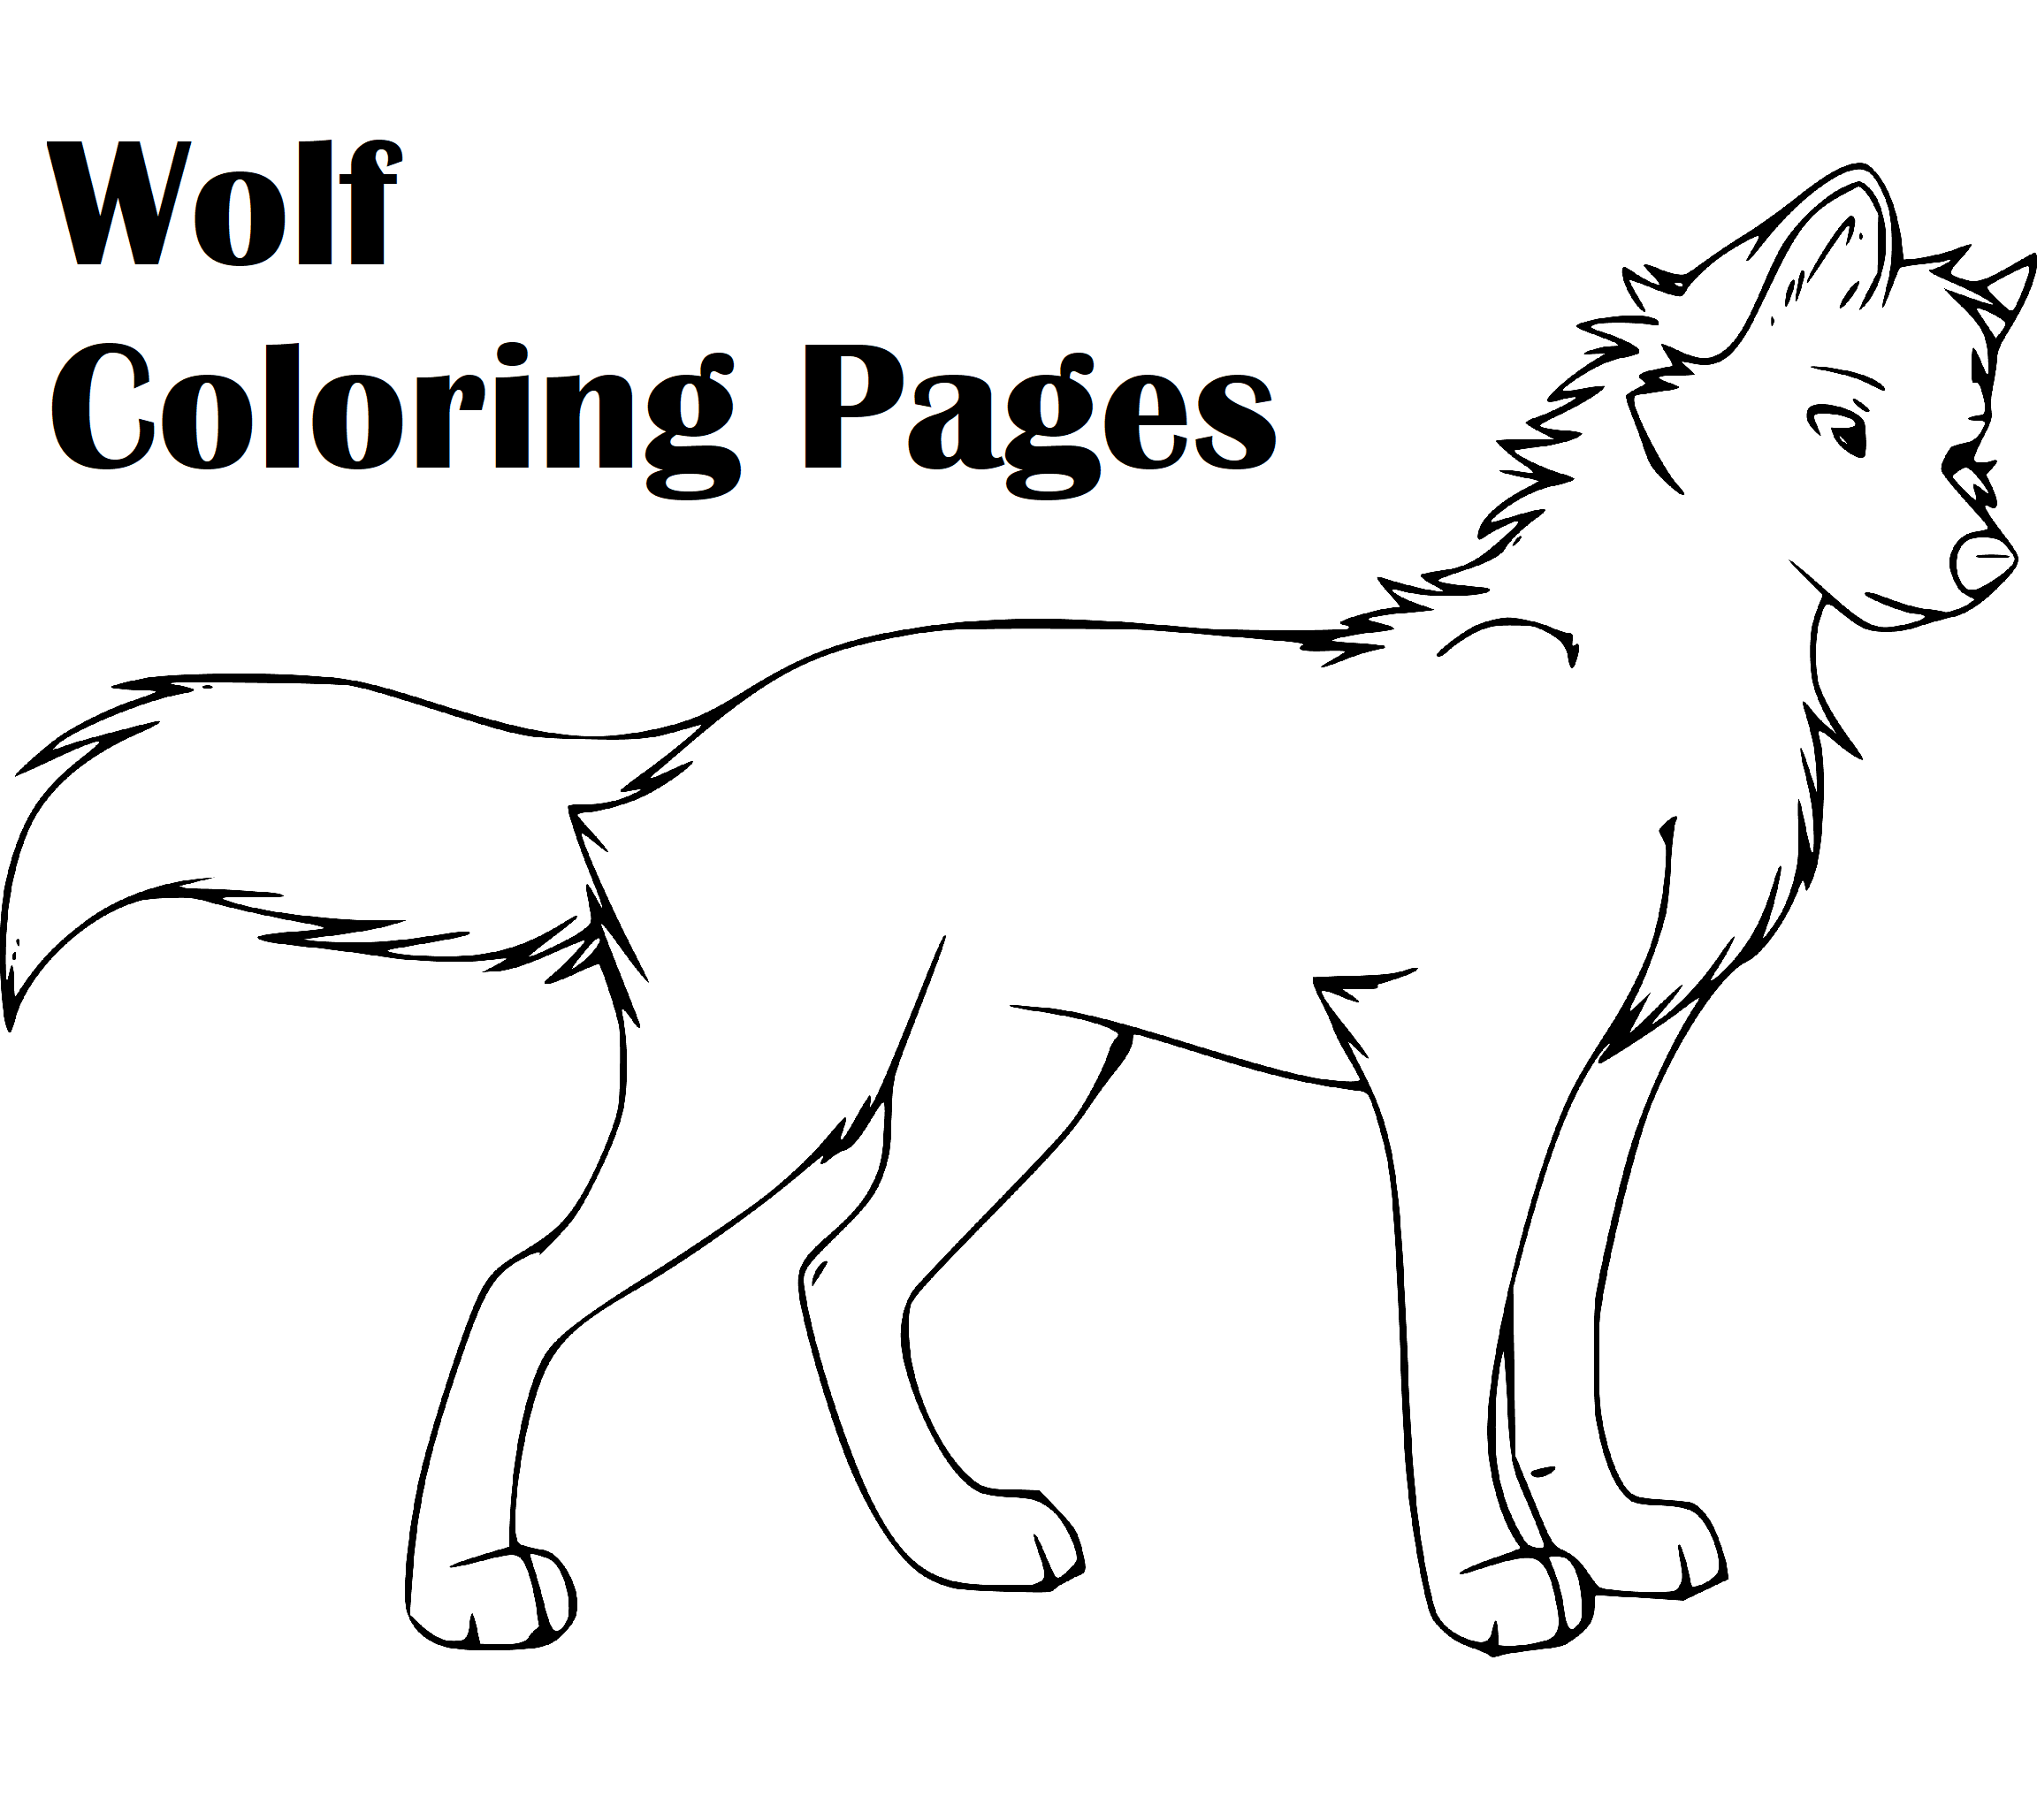 Printable wolf Coloring Page for kids.